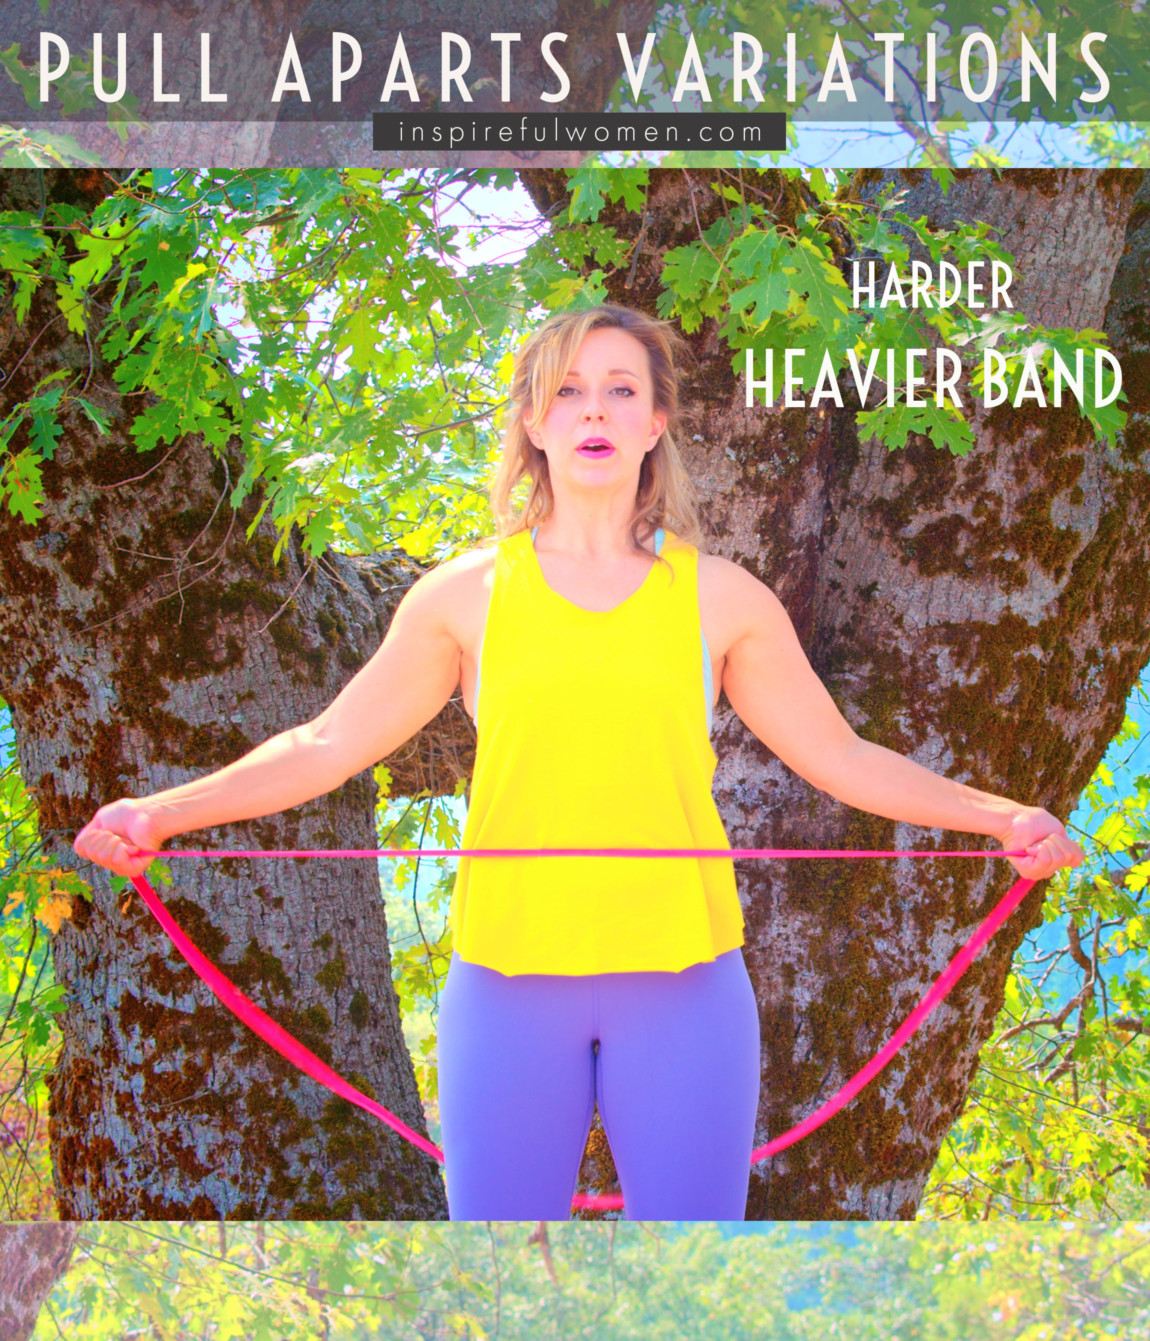 heavier-resistance-band-pull-aparts-underhand-grip-exercise-variation-harder